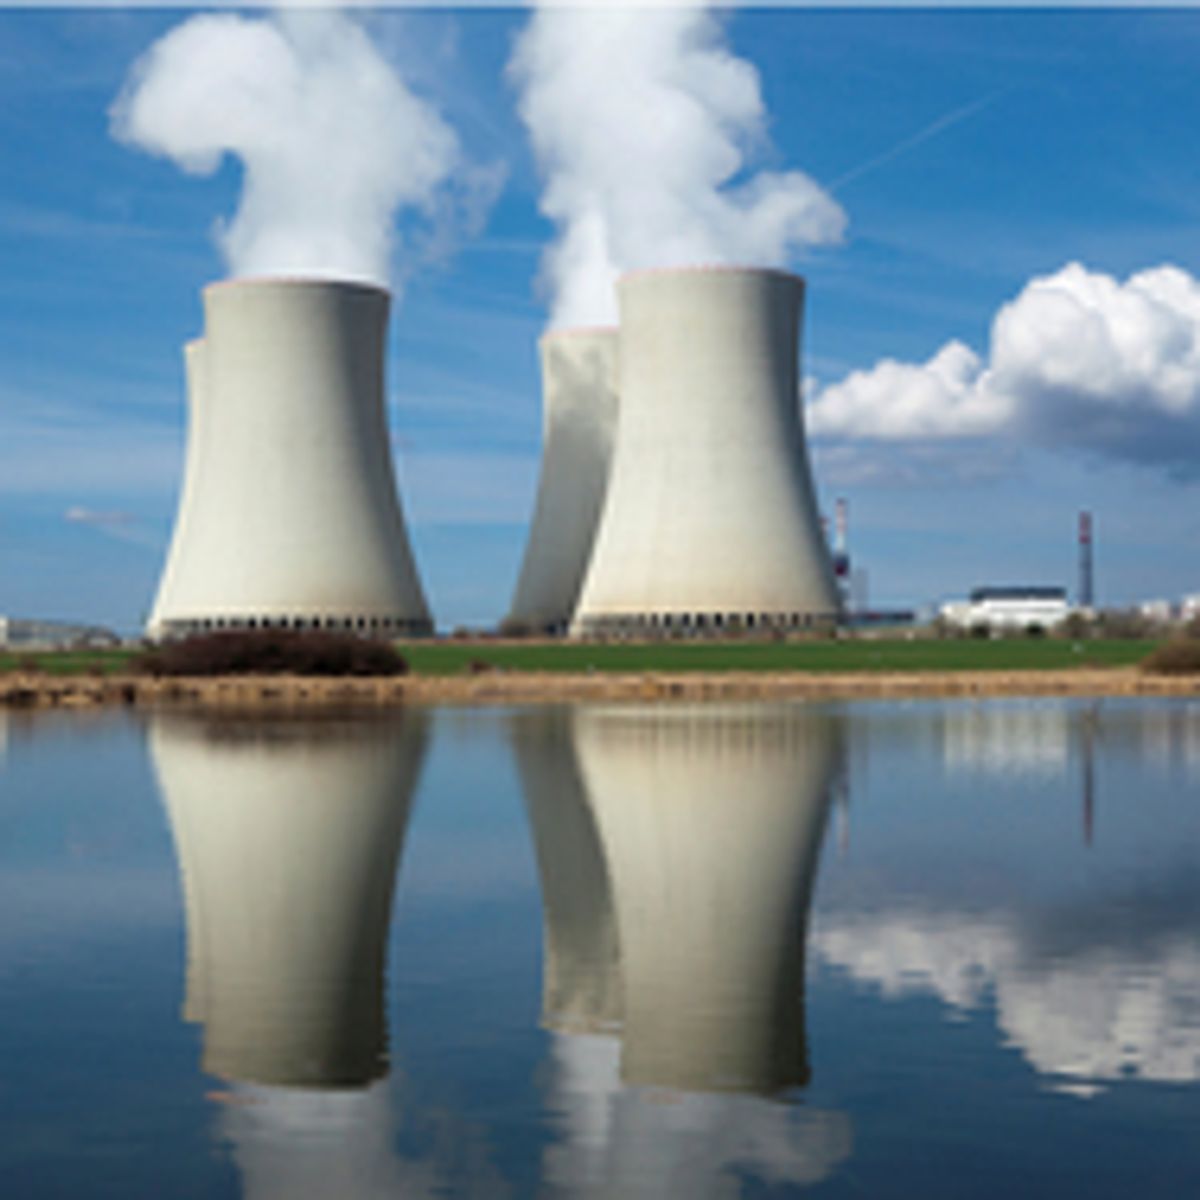 Nanoparticle Could Recapture Water Lost at Power Plants